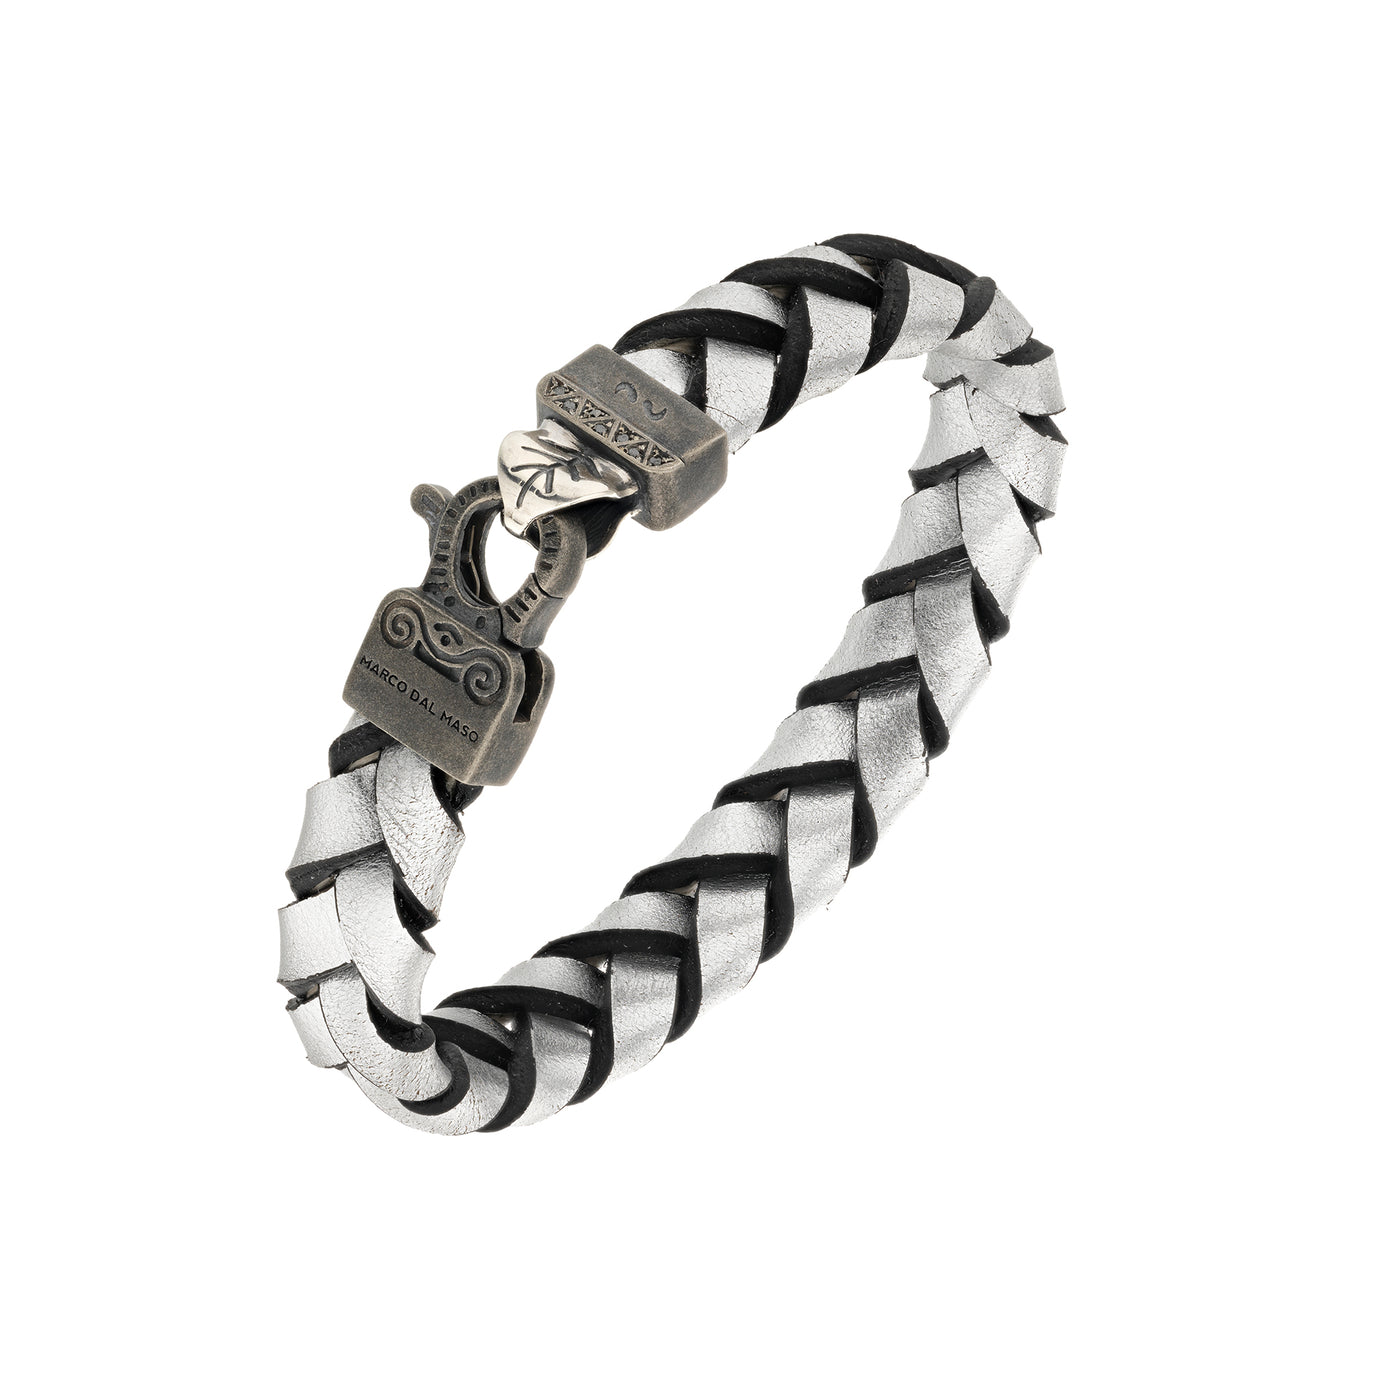 FLAMING TONGUE Oxidized and Polished Silver Bracelet with silver leather & black diamonds